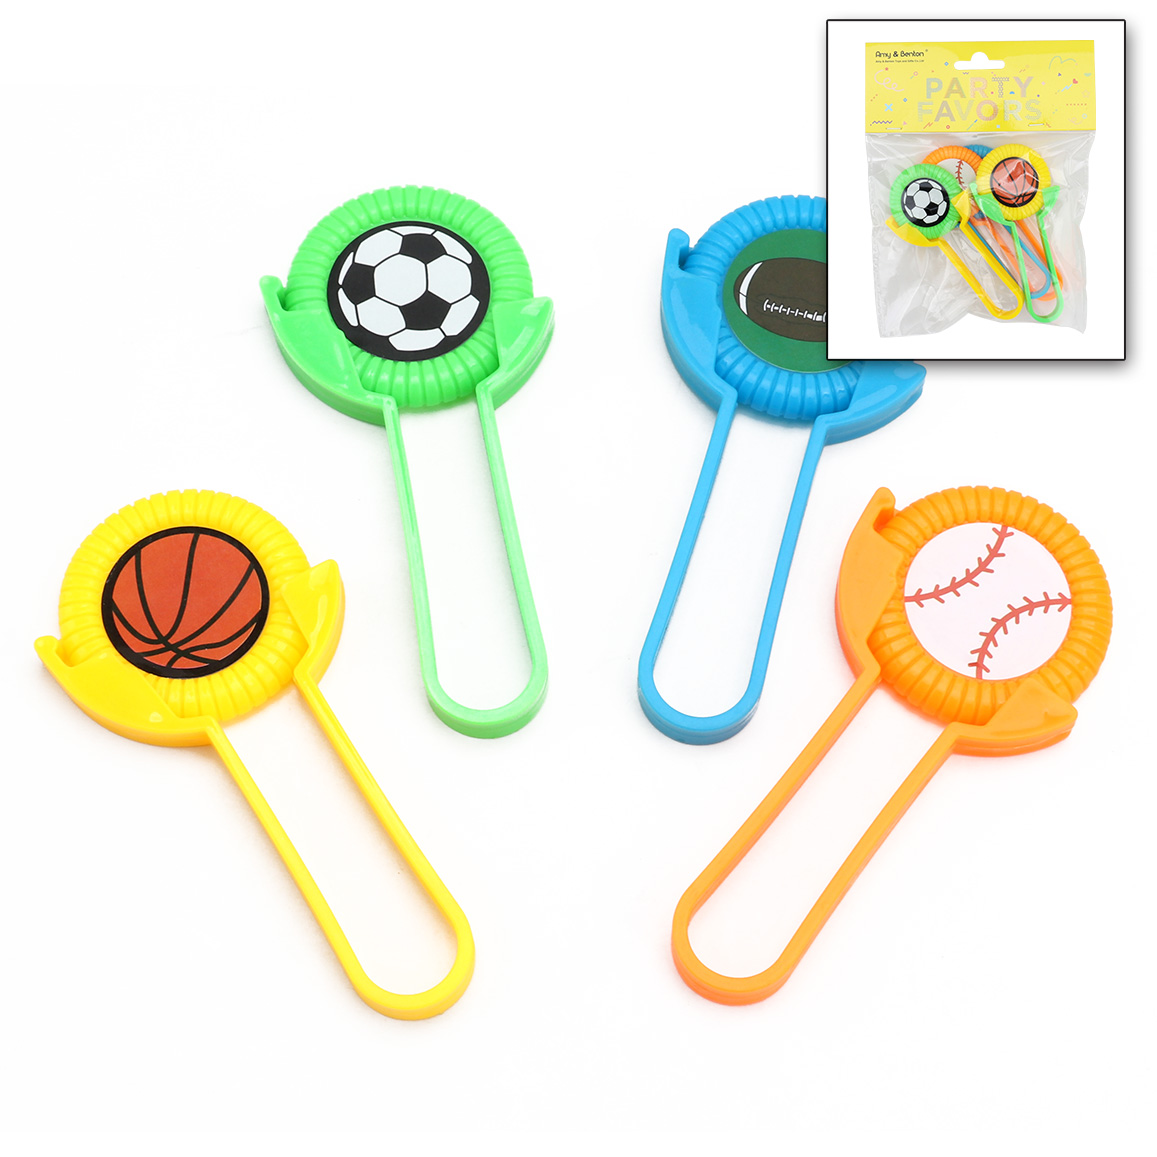 Mini Disk Shooters, Set of 4, Flying Disc Toys for Kids in Assorted Designs, Cool Outdoor Toys for Boys and Girls, Goodie Bag Stuffers and Party Favors for Sport Theme